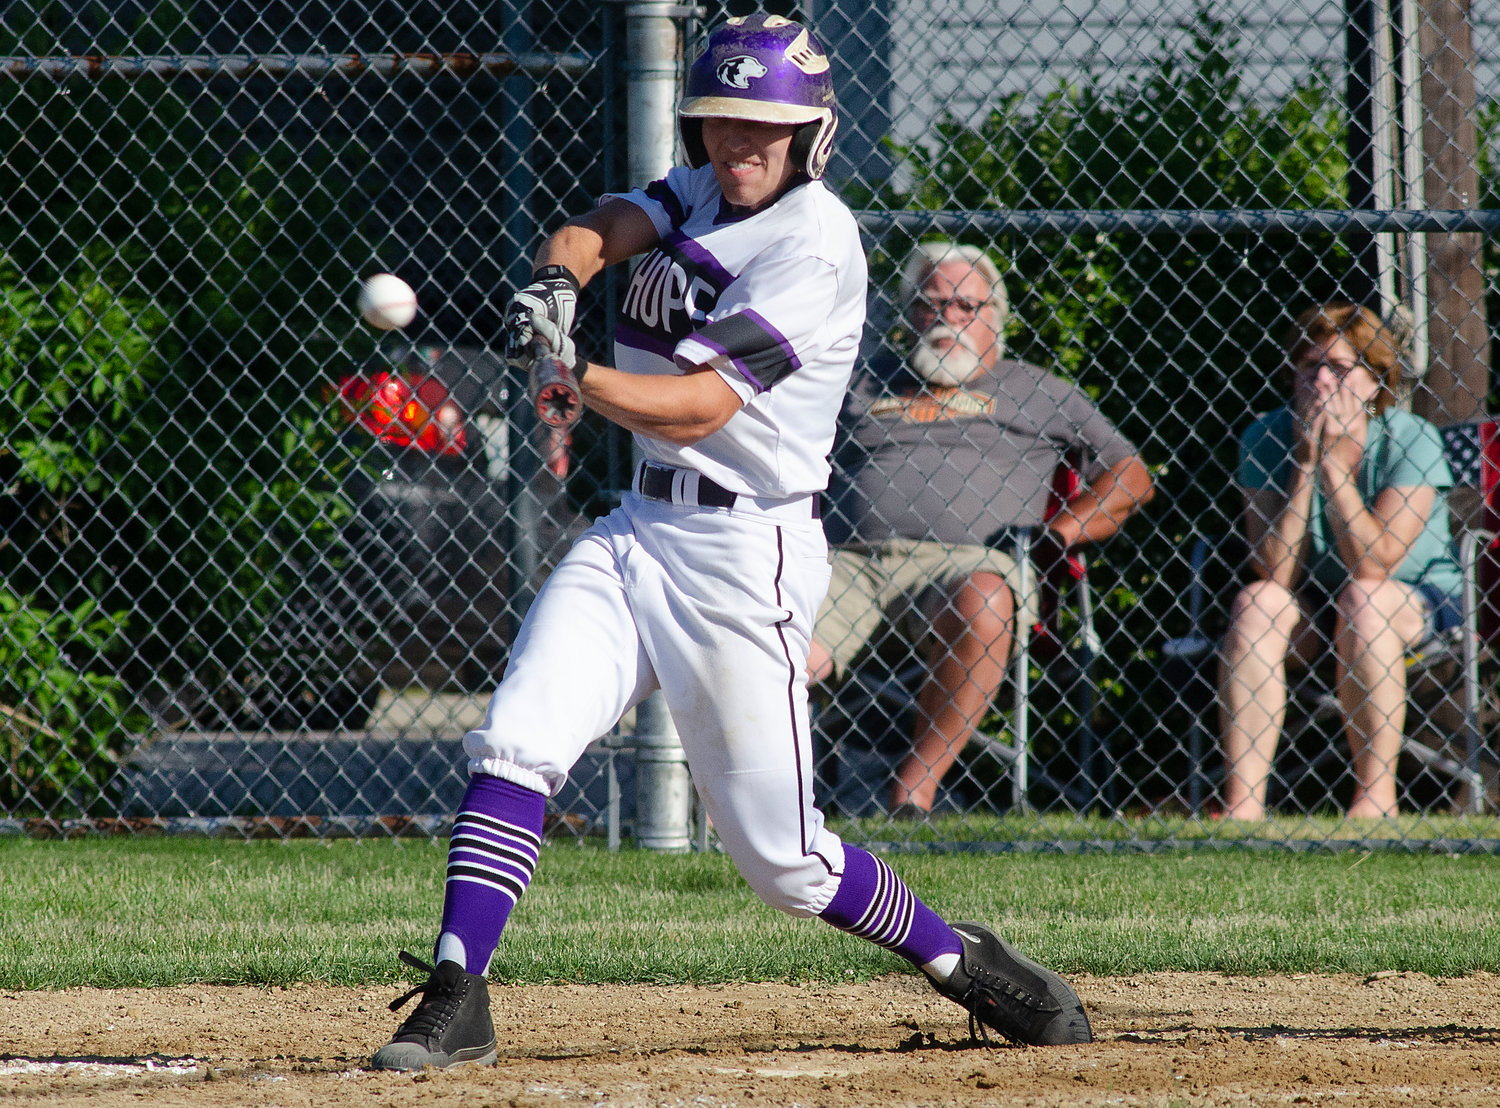 Senior first baseman Matt Brackett smashes a pitch into the right centerfield gap for a two RBI triple during the team's playoff game against Tiverton on Sunday night. Mt. Hope won the contest, 5-4, in extra innings.